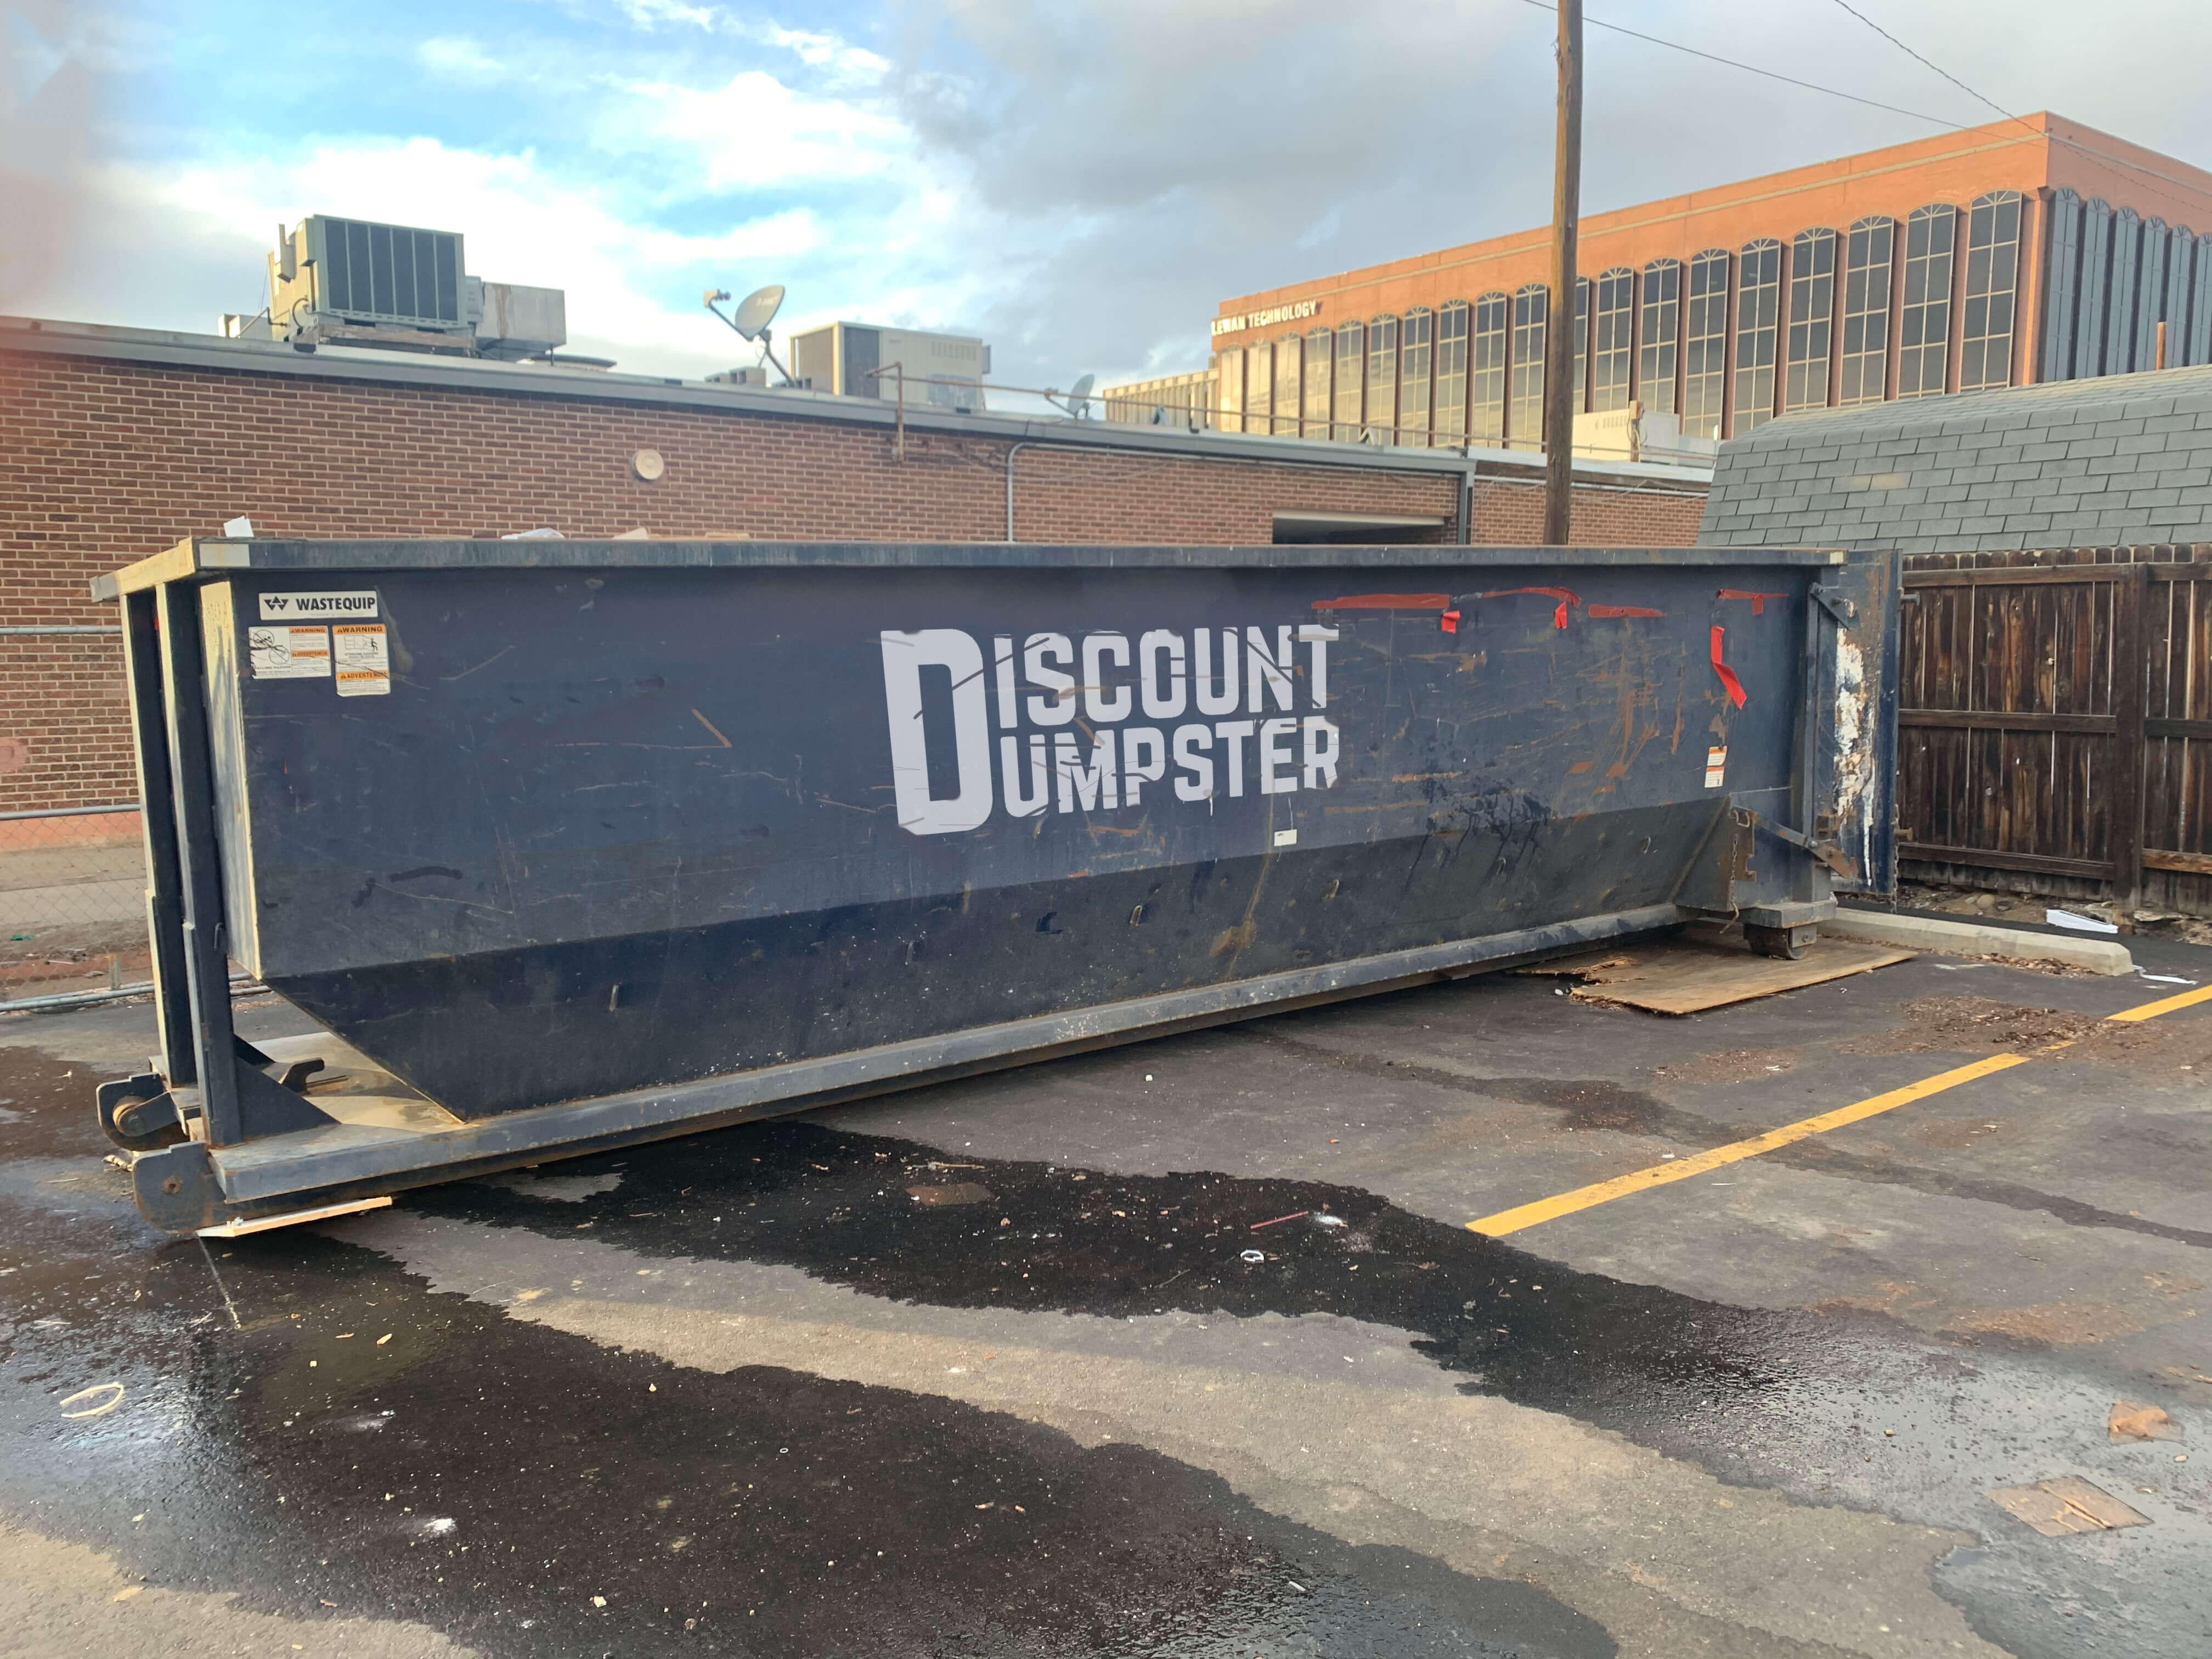 Discount dumpster has roll off dumpsters for home or commercial use in chicago il Discount Dumpster Chicago (312)549-9198